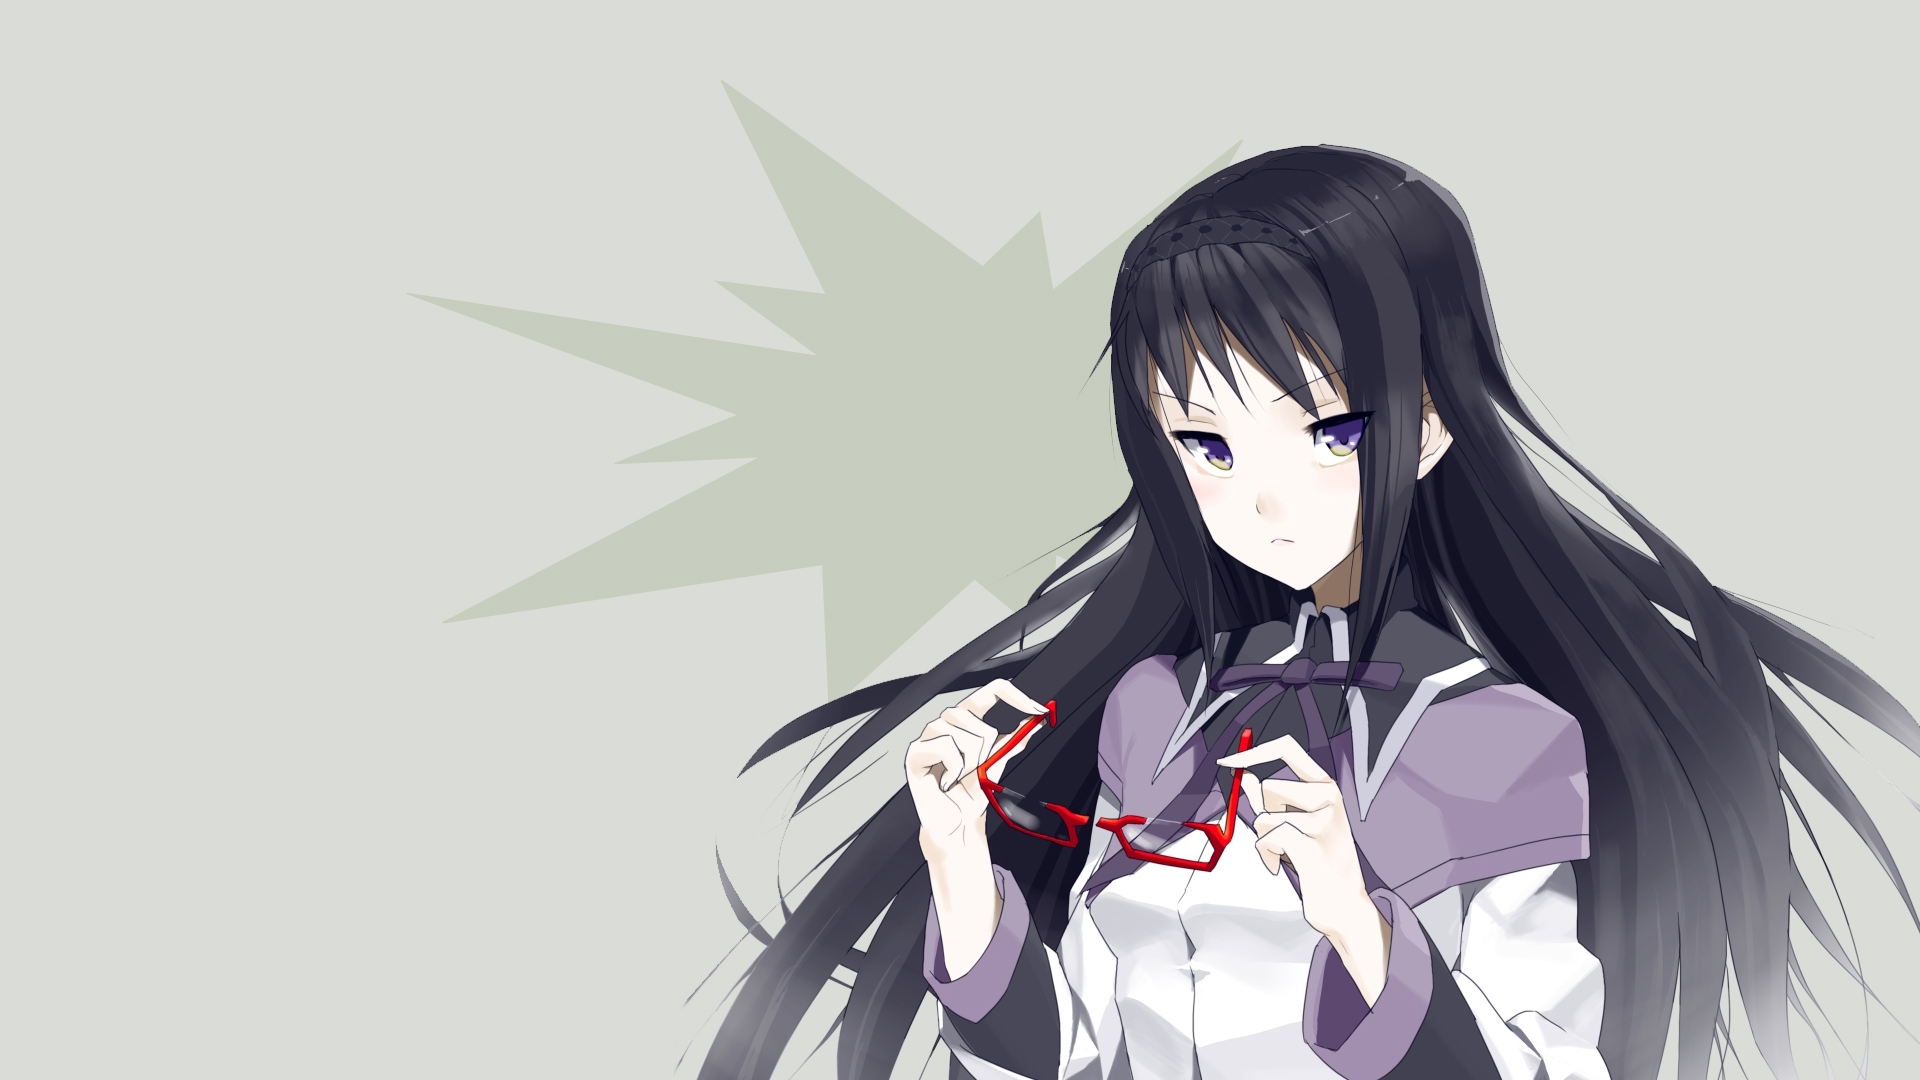 Anime Girl With Purple Eyes And Black Hair